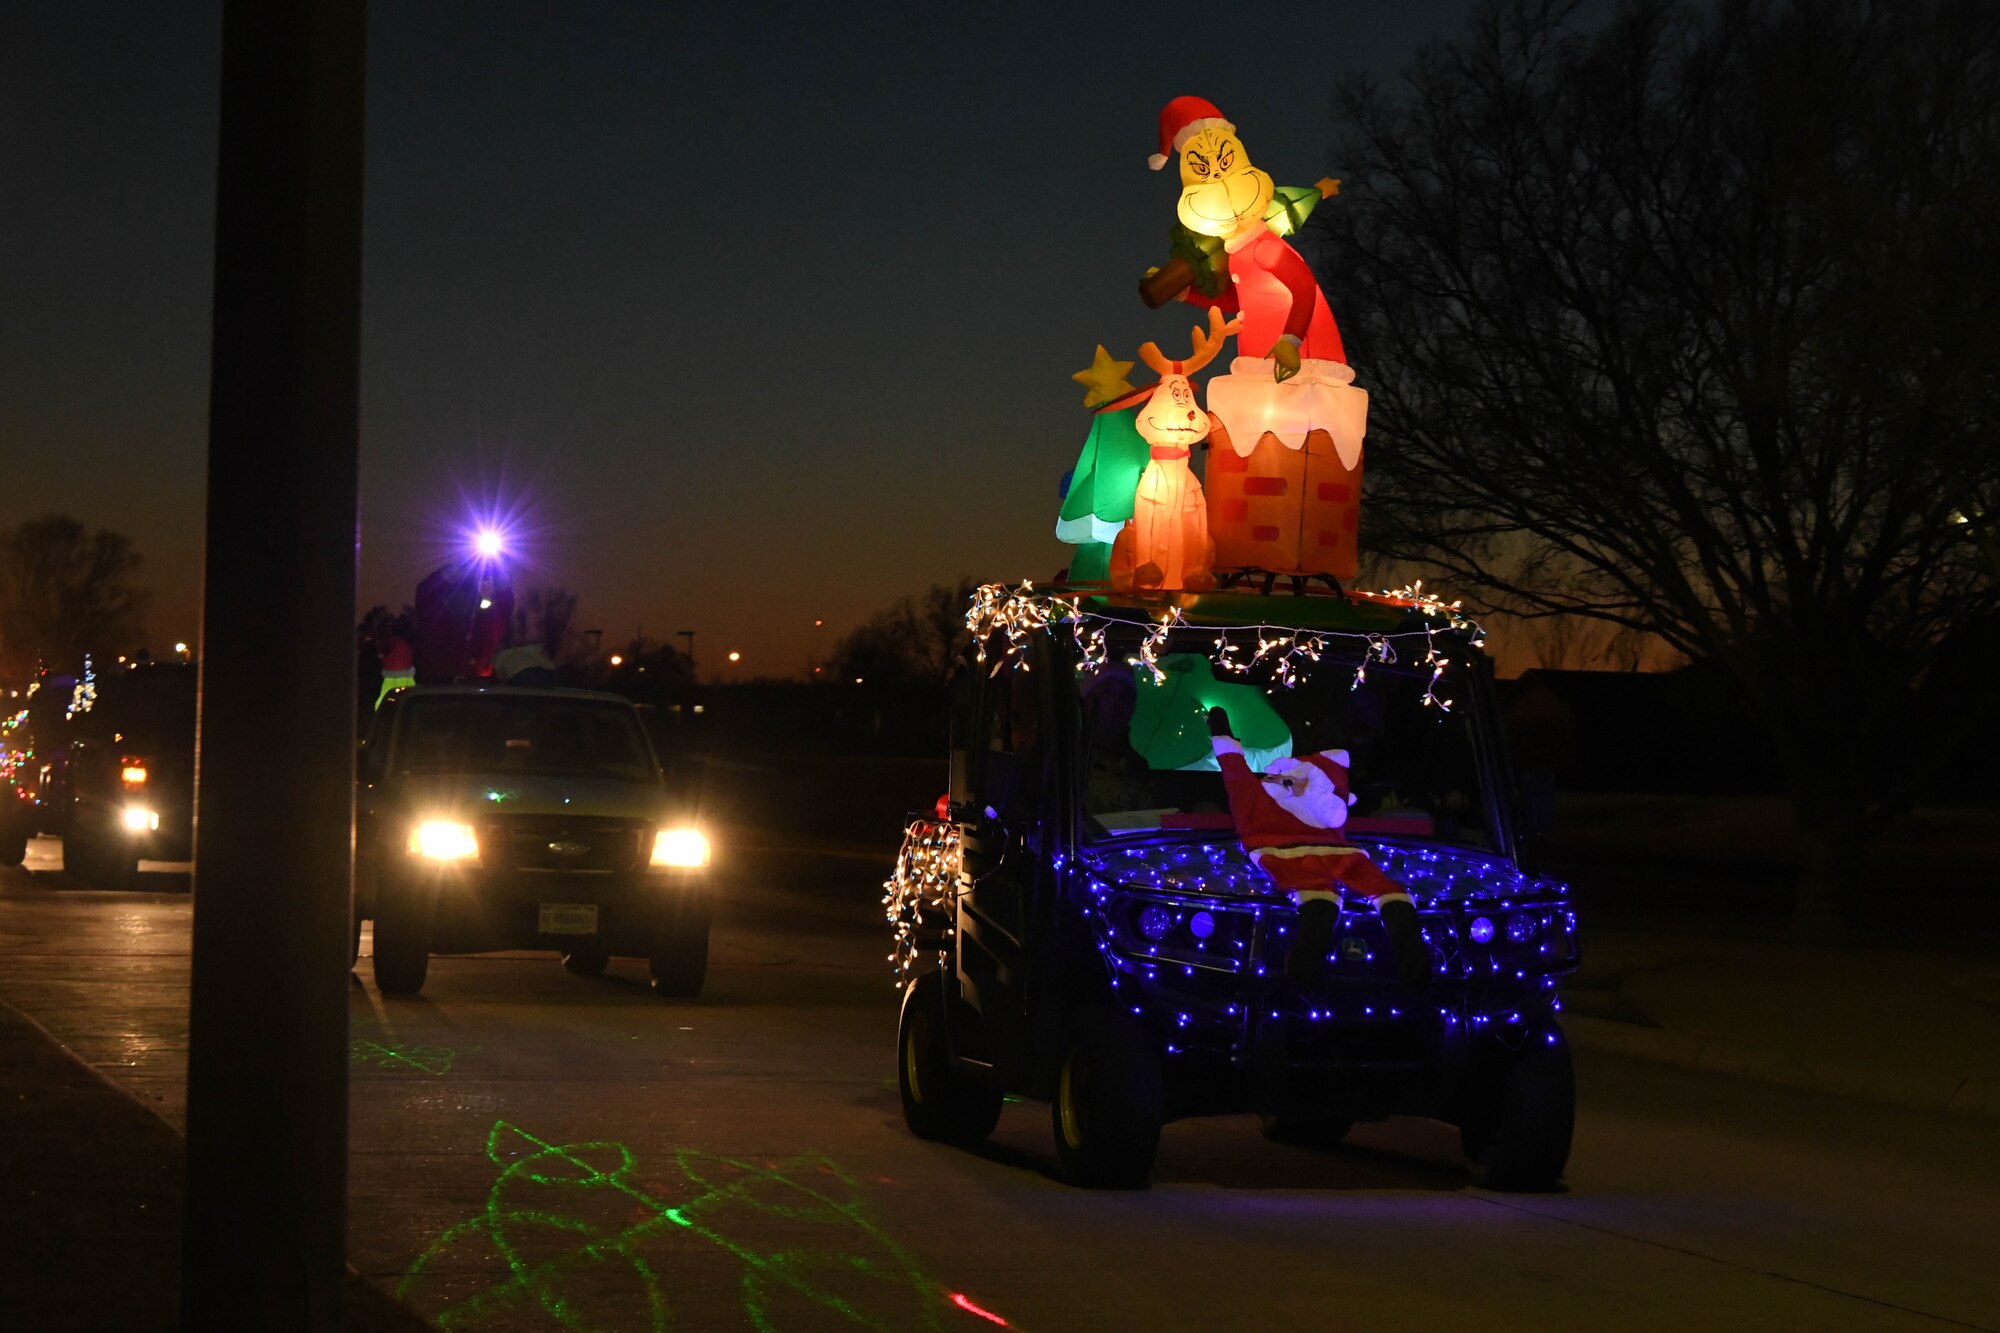 A lighted float is shown during a holiday parade and float contest at Altus Air Force Base, Oklahoma, Dec. 13, 2022. This float was decorated by members of the 97th Civil Engineer Squadron’s operations flight and won “Best Small Float” in the overall competition. (U.S. Air Force photo by Airman 1st Class Miyah Gray)